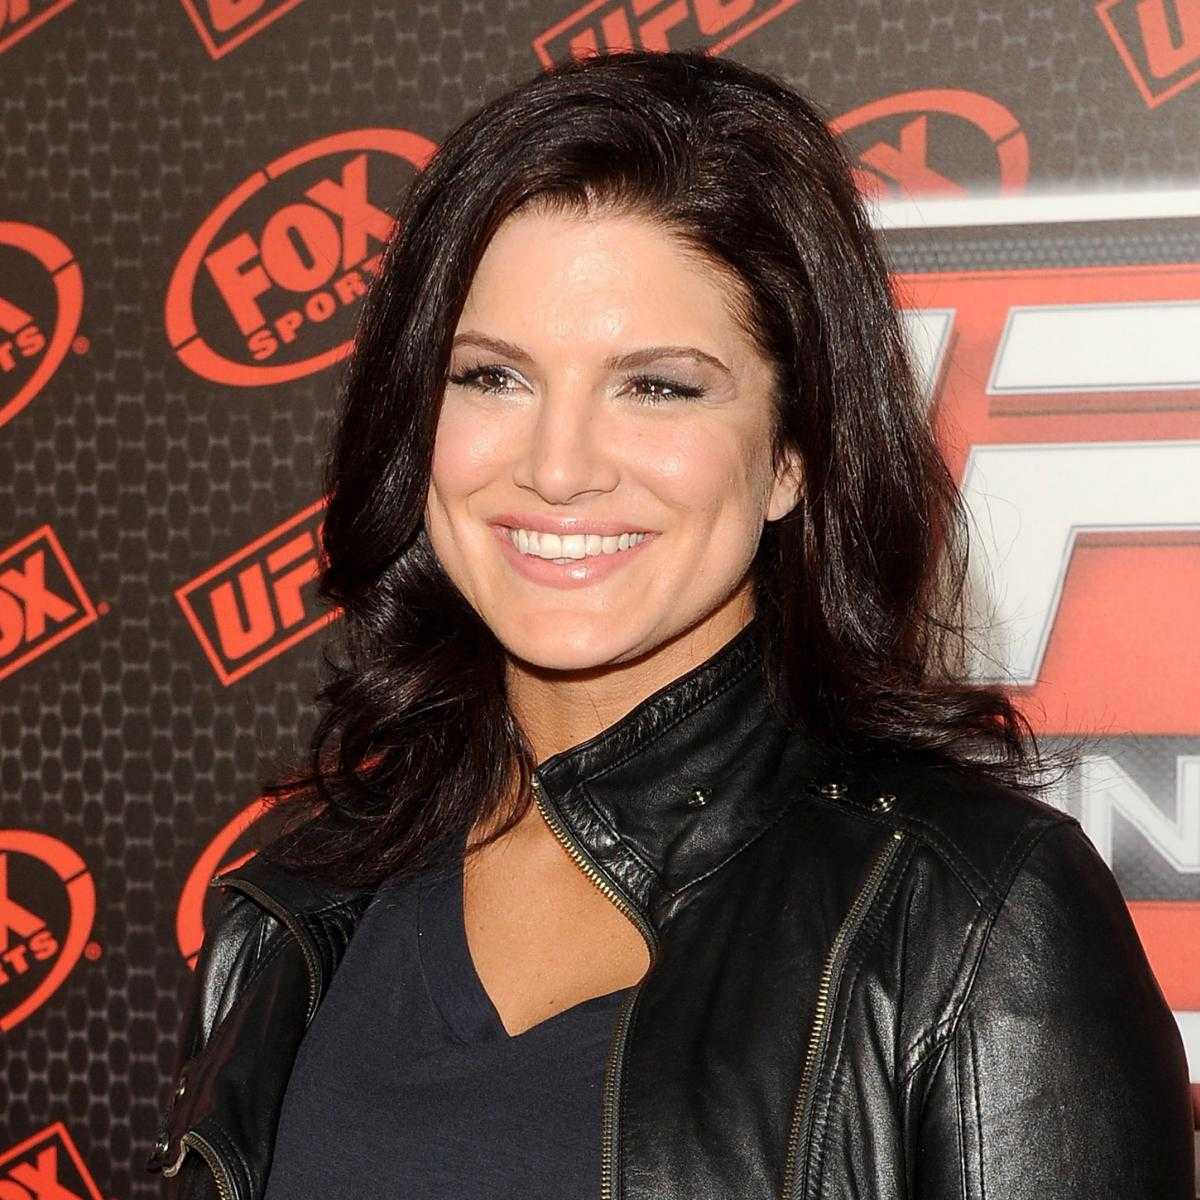 70+ Hottest Pictures Of Gina Carano Who Plays Angel Dust In Deadpool Movies 45